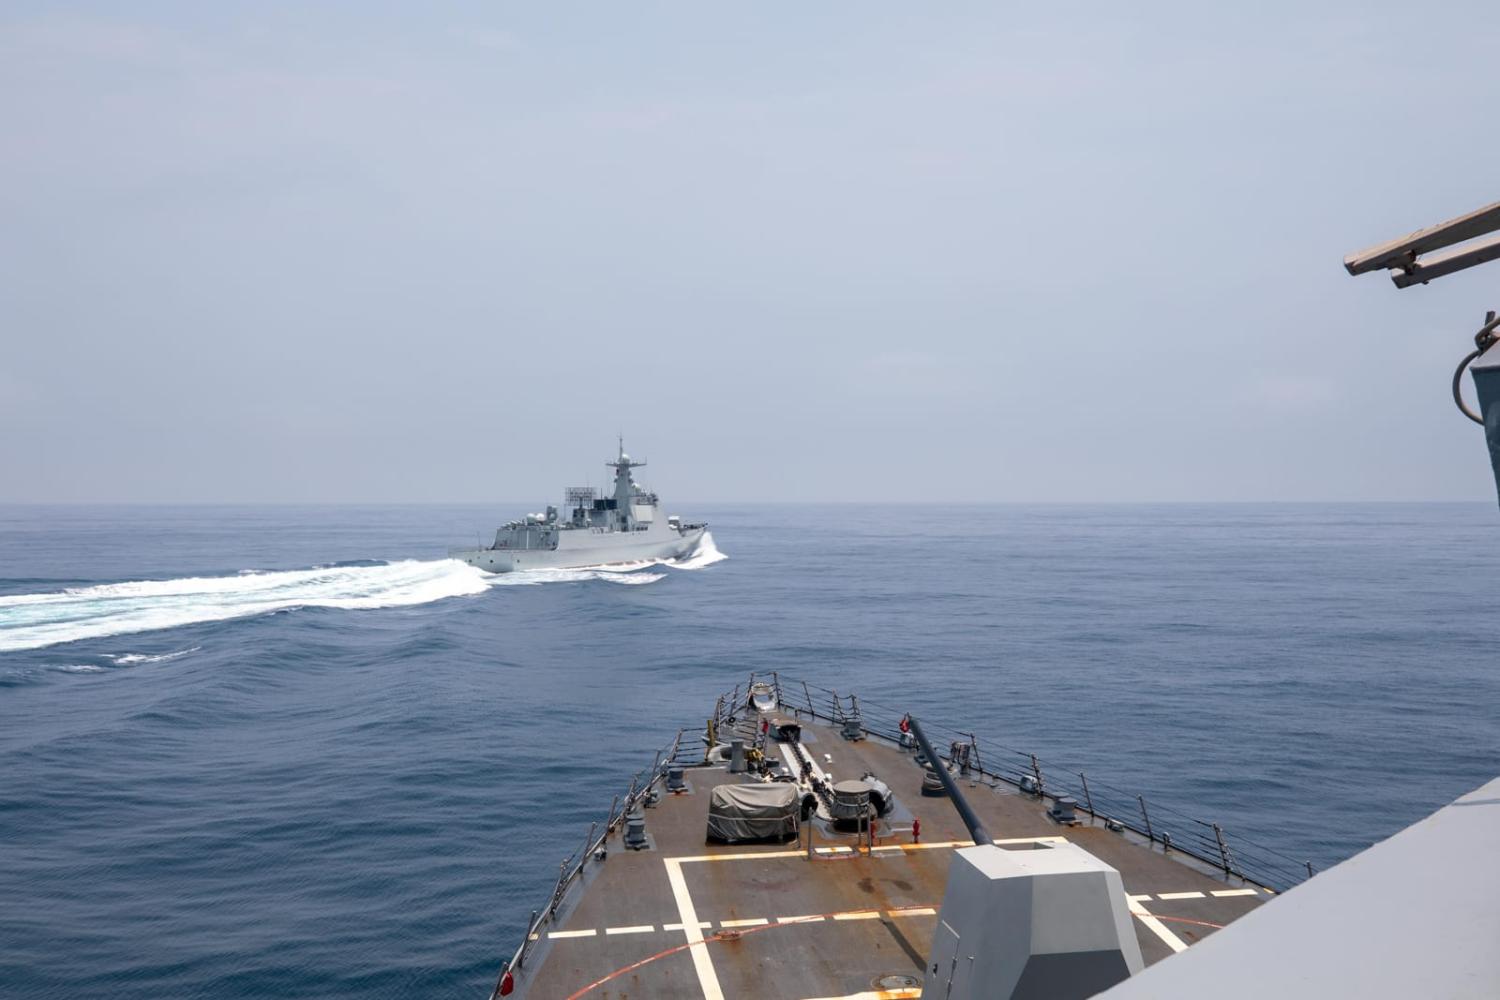 A photo released by the US Navy from the deck of USS Chung-Hoon as PLA-N LY 132 cuts across the bow in the Taiwan Strait (Andre T. Richard/US Navy)